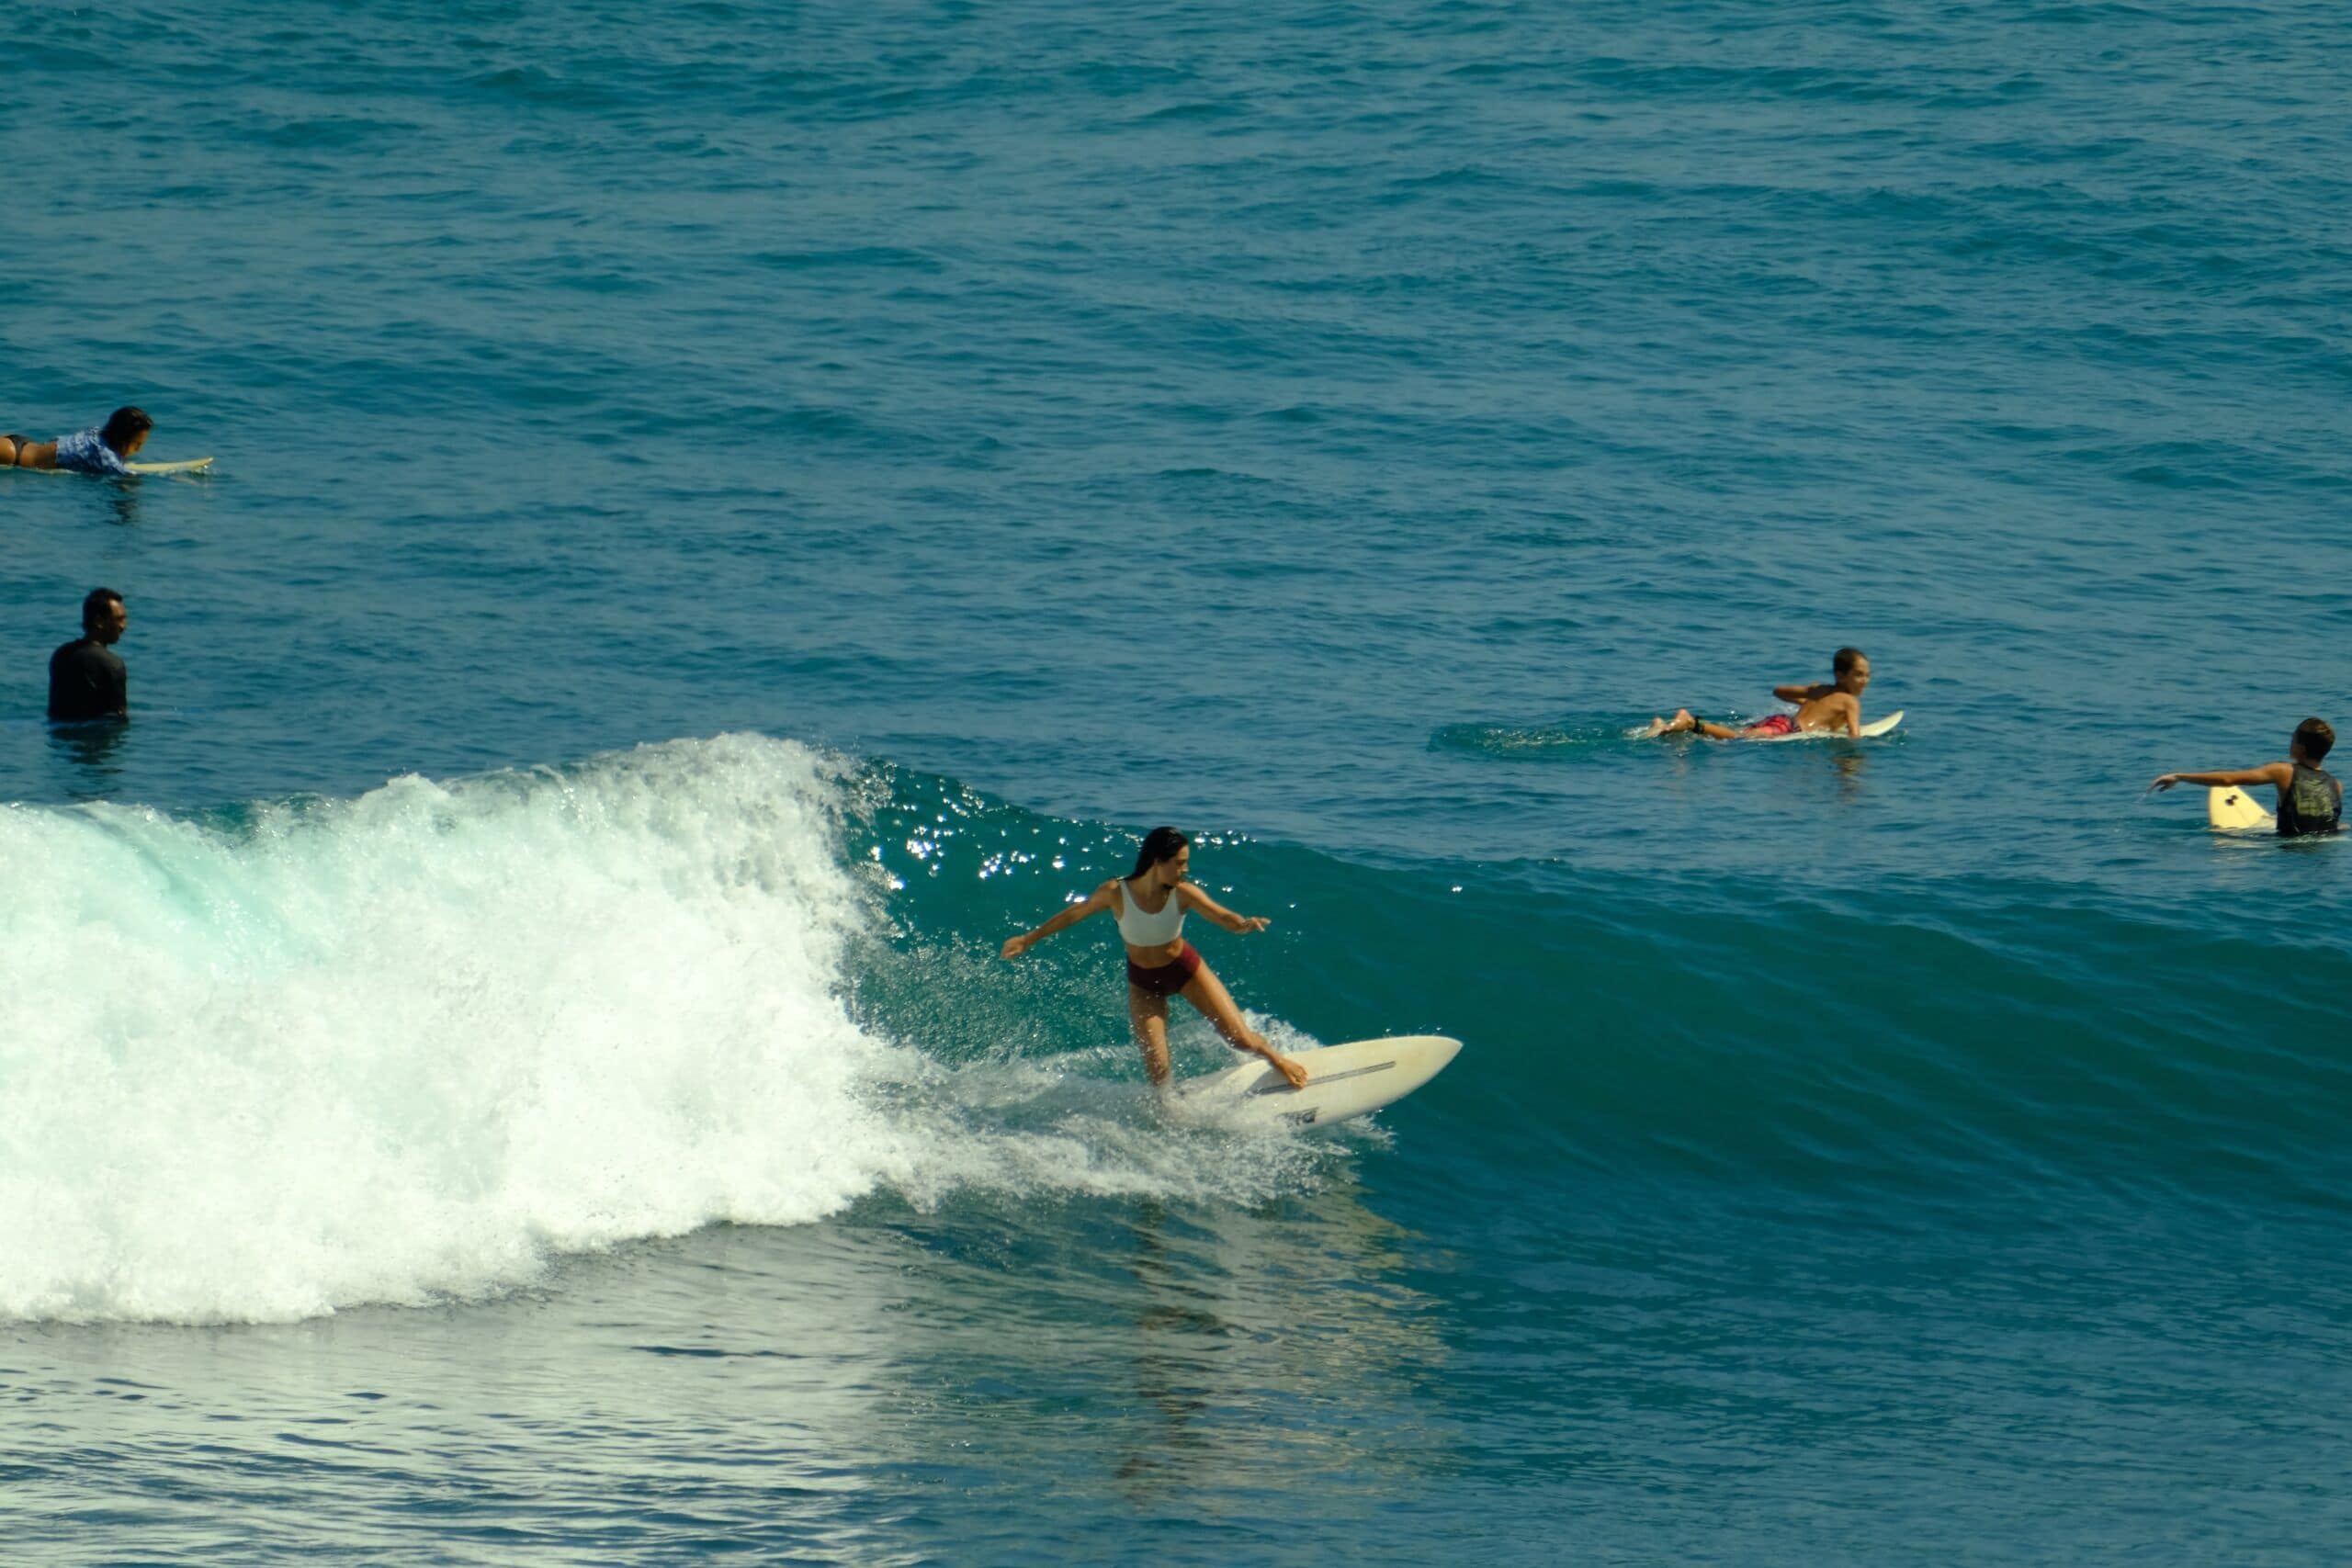 Woman surfing a wave at Echo Beach on a white surfboard, wearing a white top and red bottom, with four other surfers in the water around her.